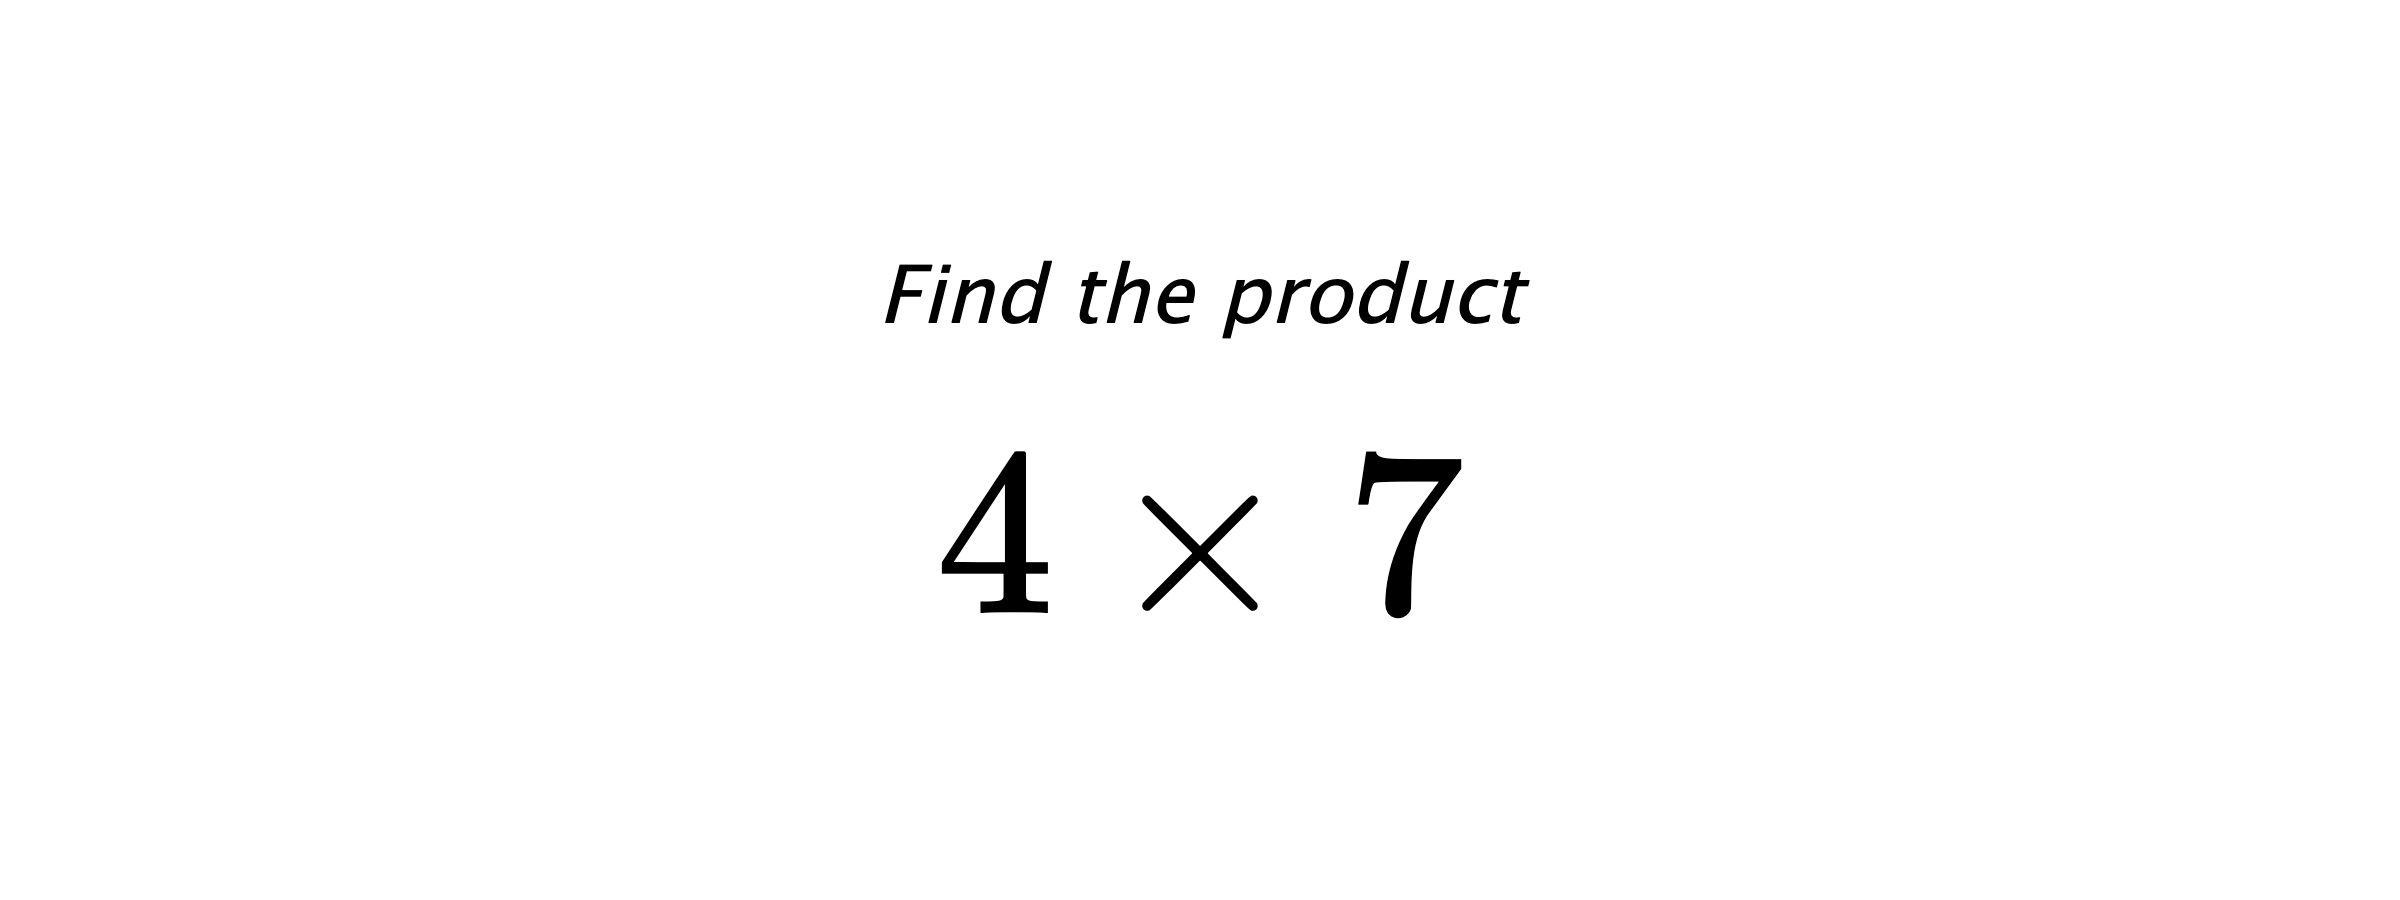 Find the product $ 4 \times 7 $